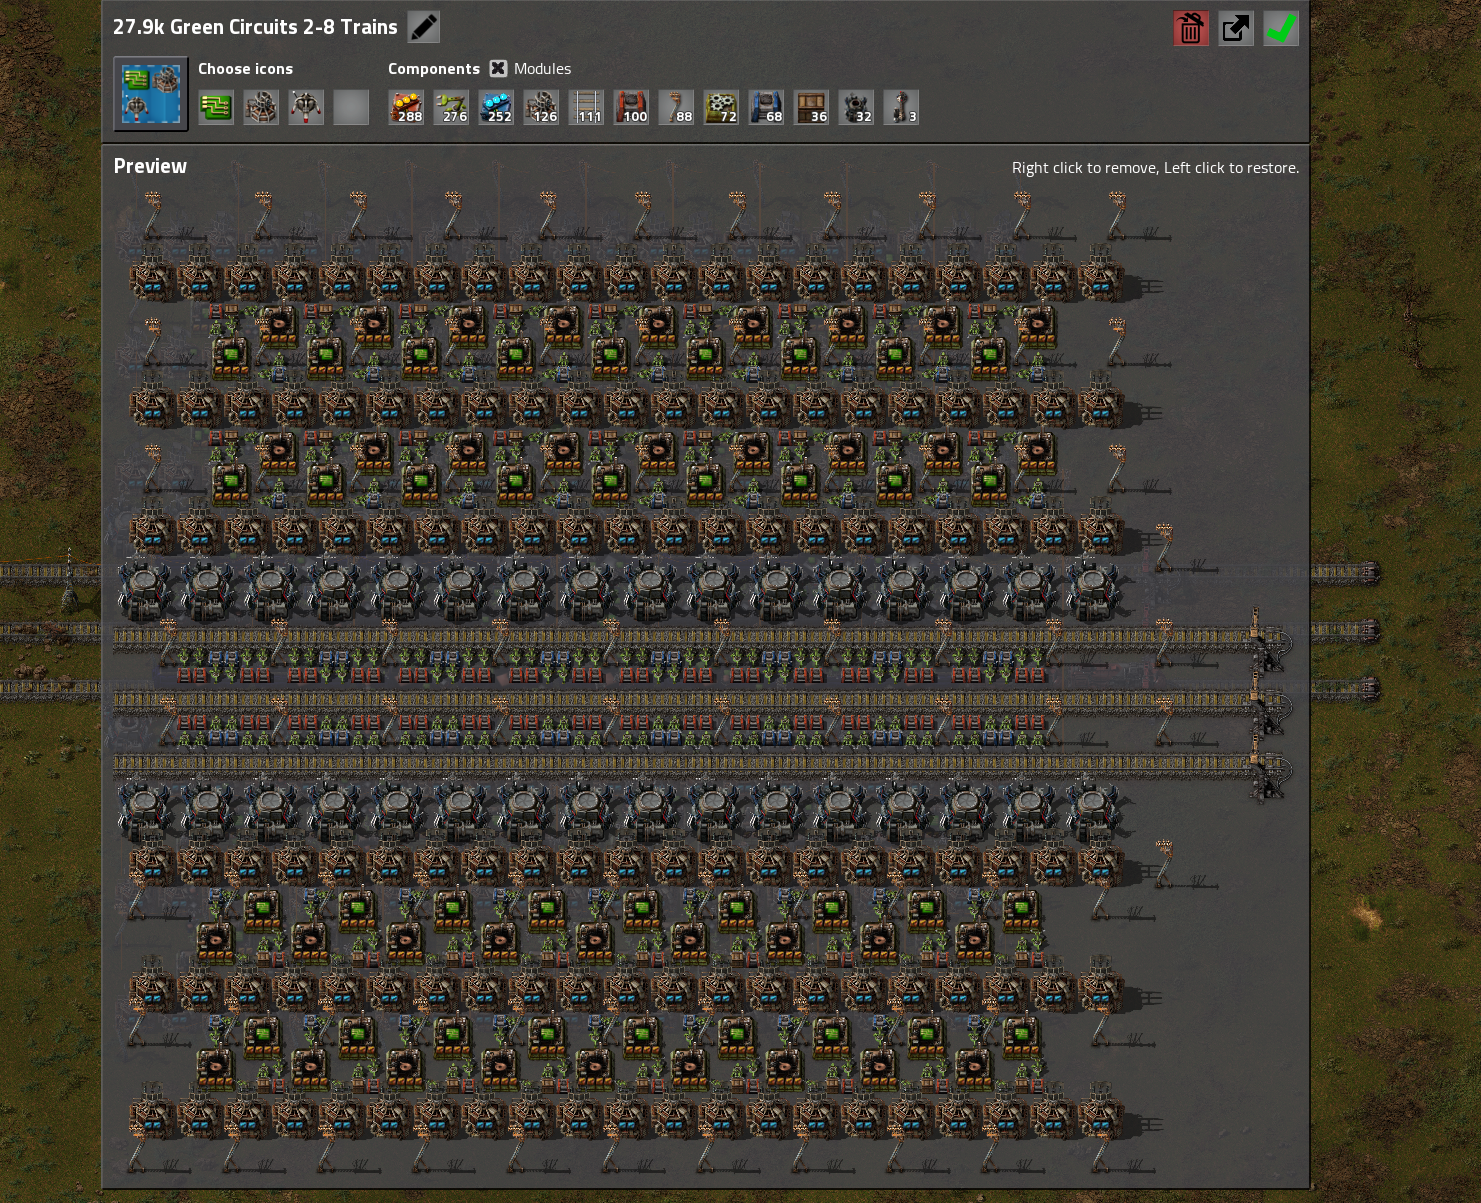 27.9k Green Circuits per minute using about 650 bots.  No charging issues.